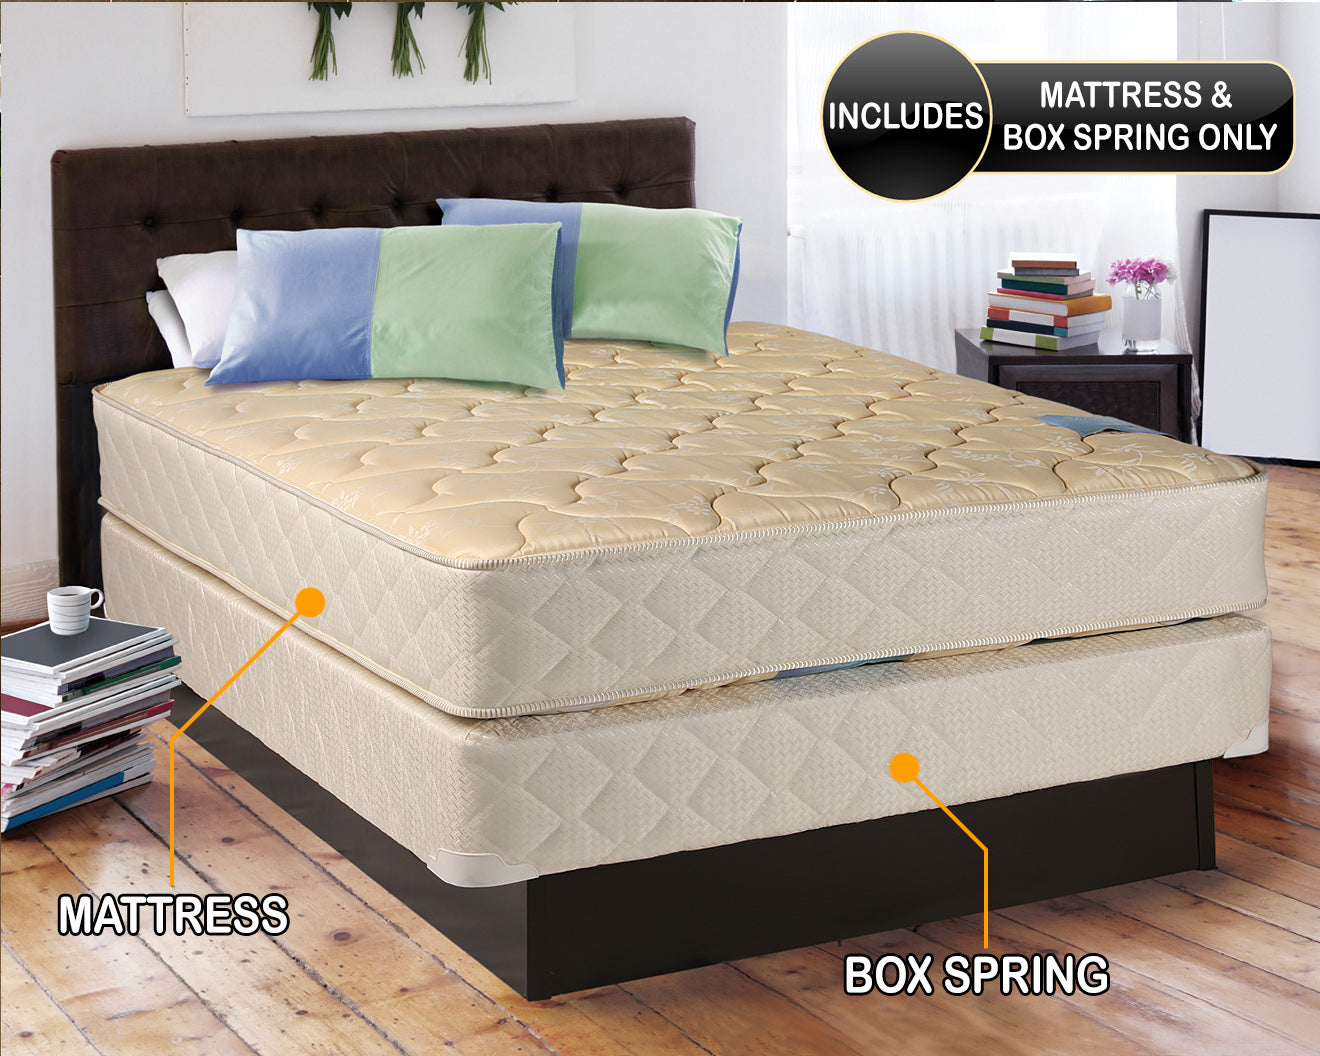 Chiro Premier Orthopedic (Beige) Twin XL Size Mattress and Box Spring Set - Fully Assembled, Good for Your Back, Long Lasting and 2 Sided